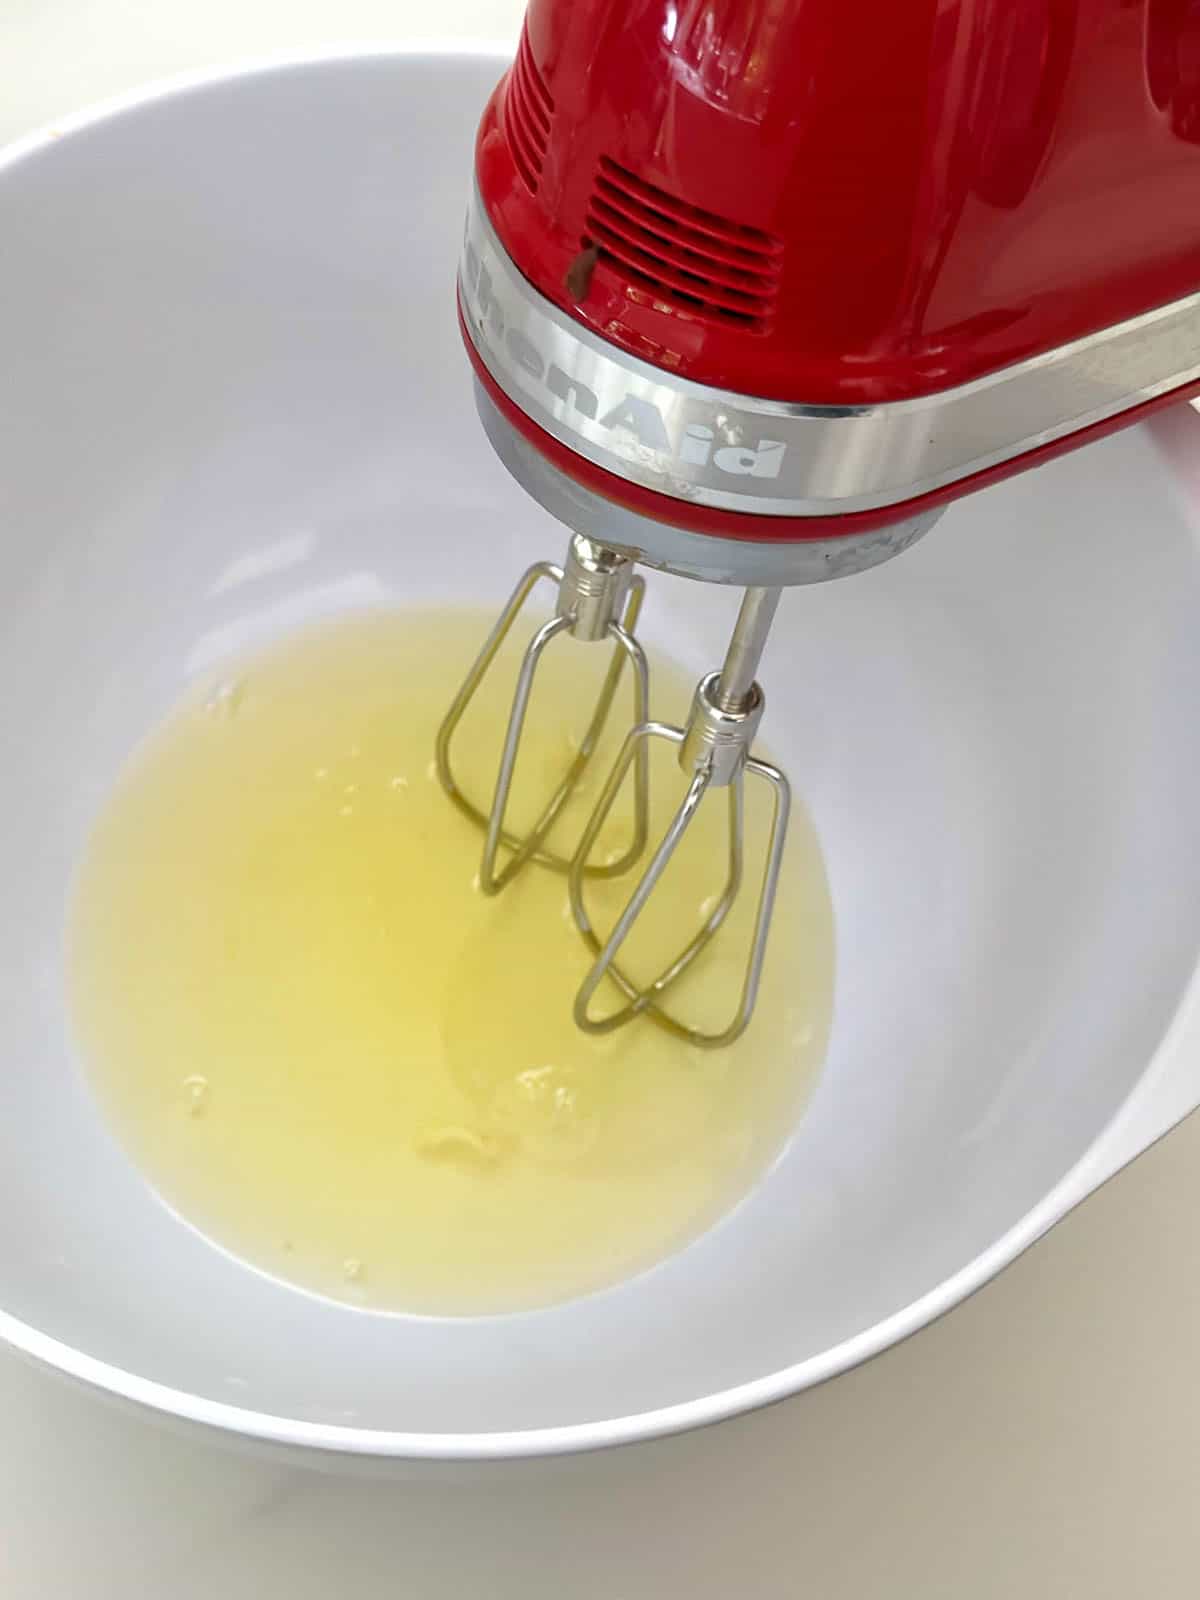 Egg whites in a bowl with an electric whisk.